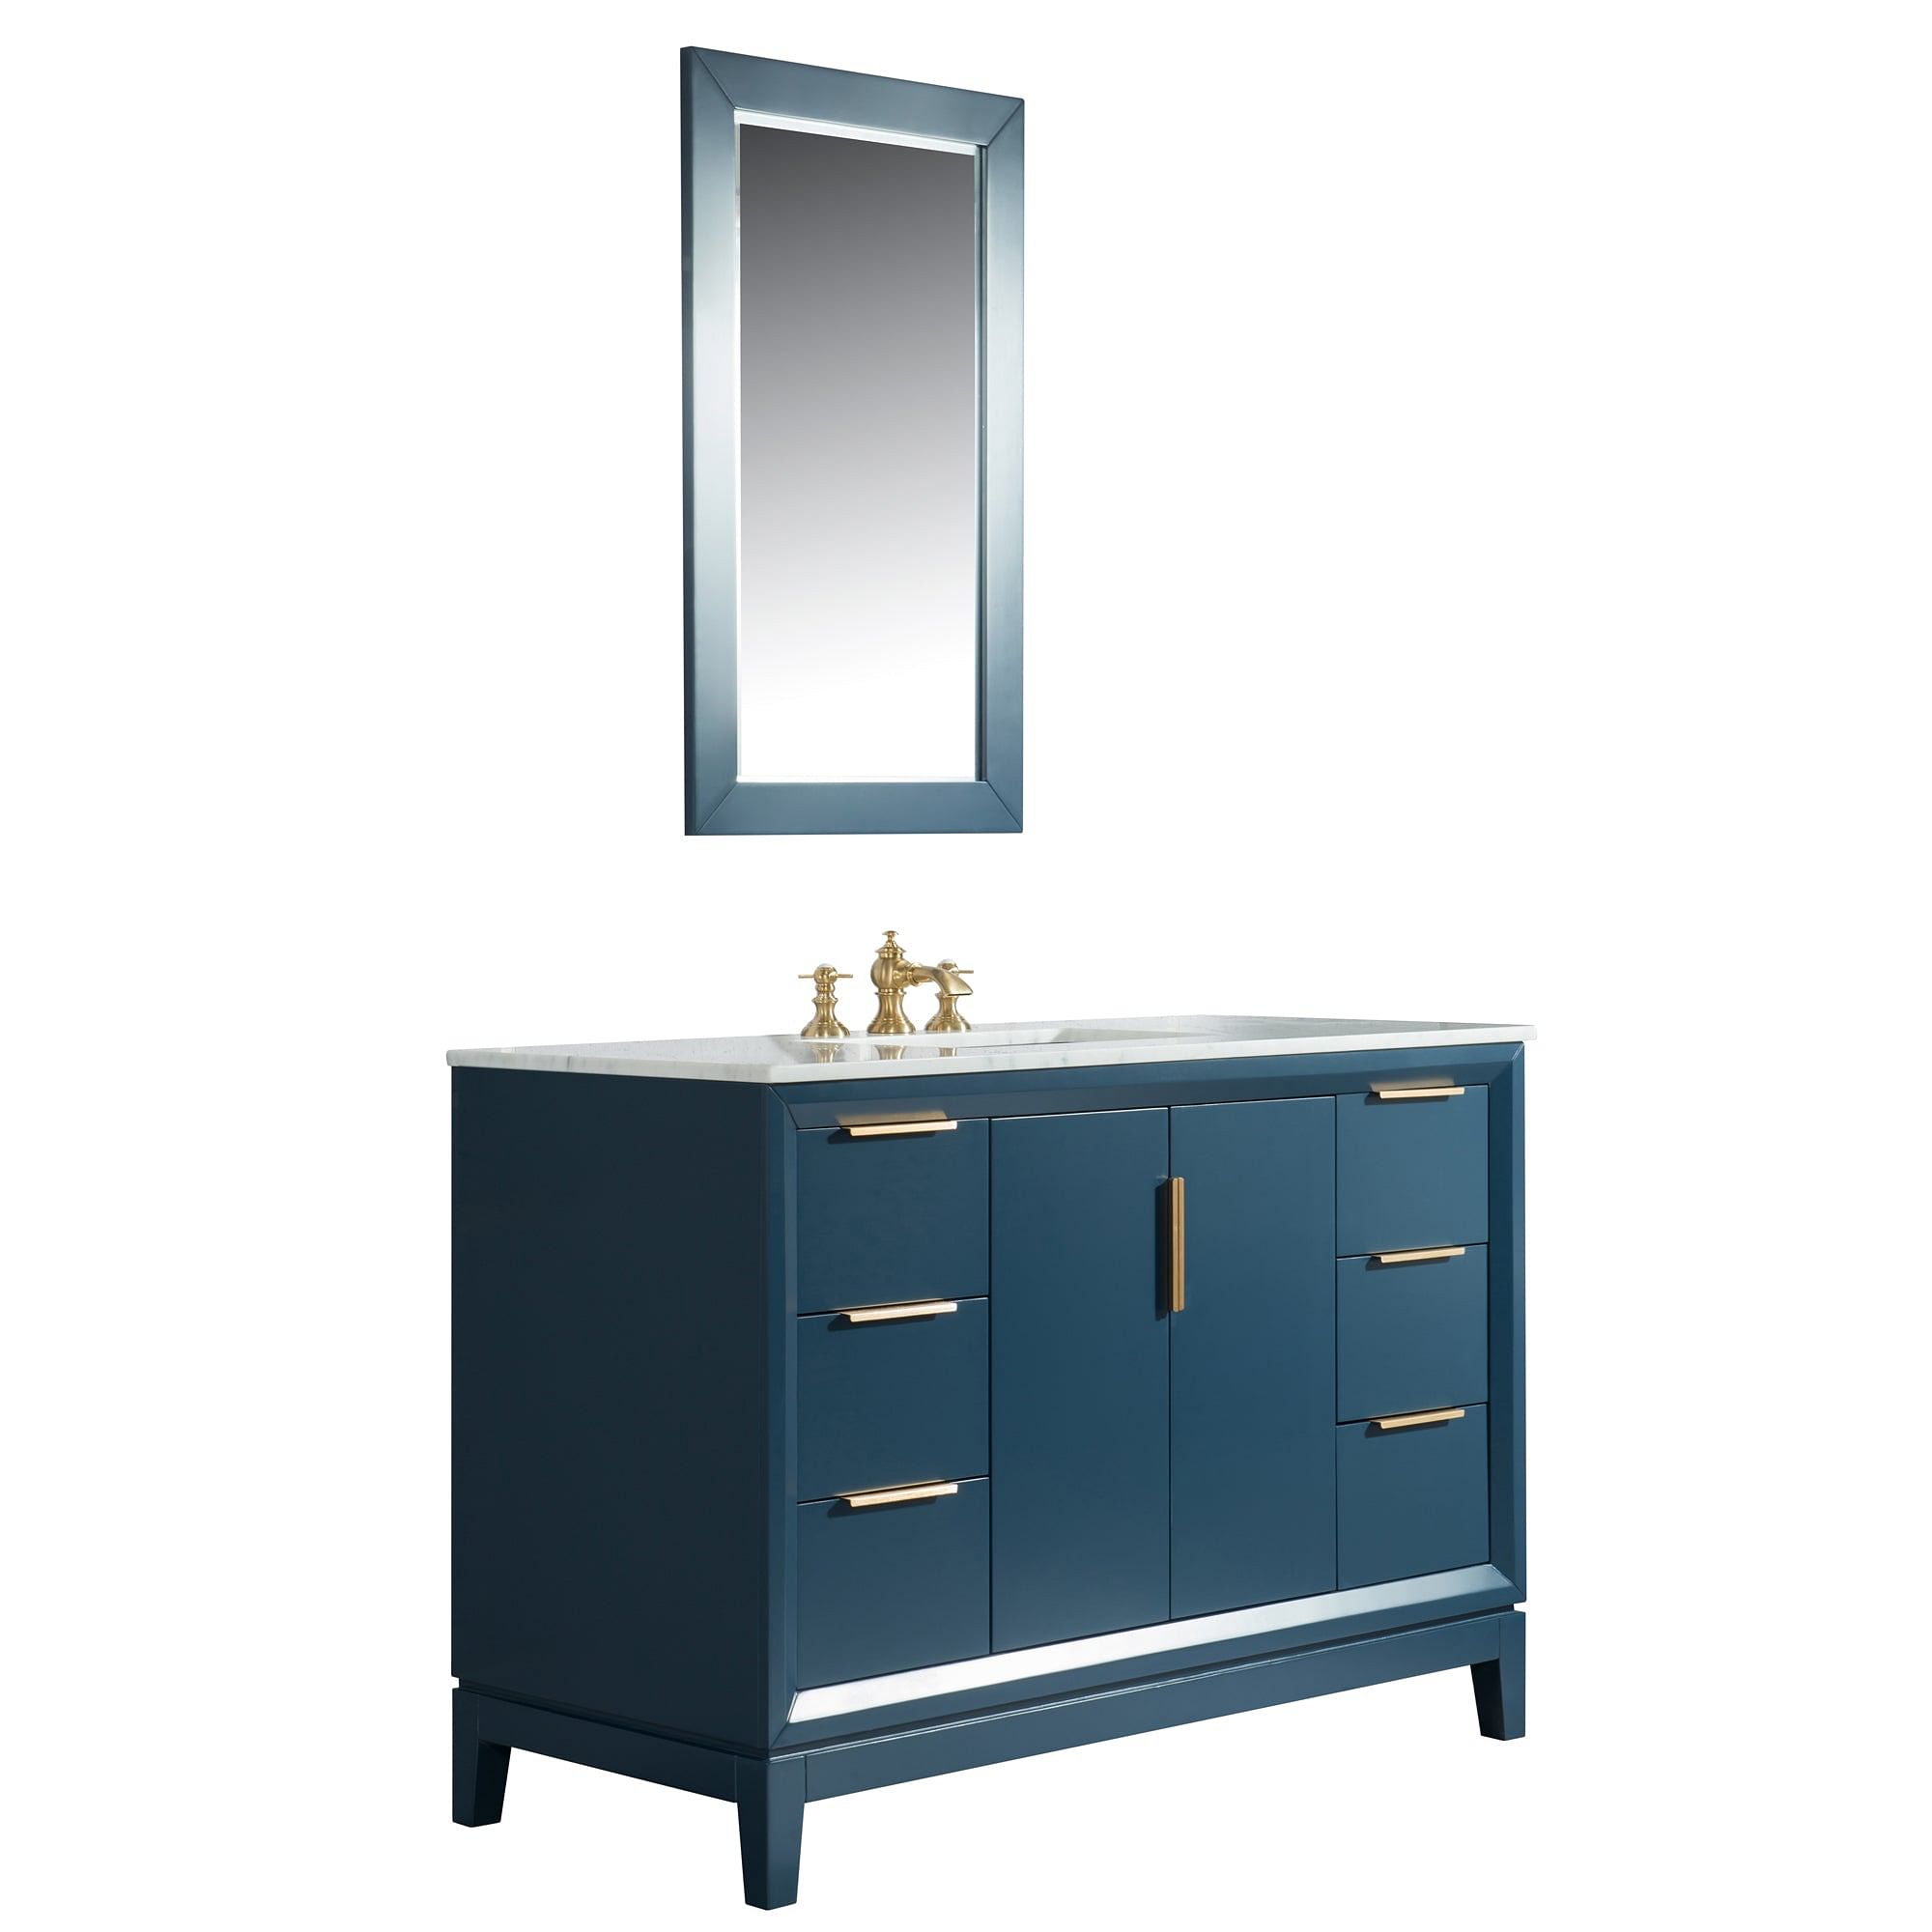 Elizabeth 48-Inch Single Sink Carrara White Marble Vanity In Monarch Blue  With Faucet(s)